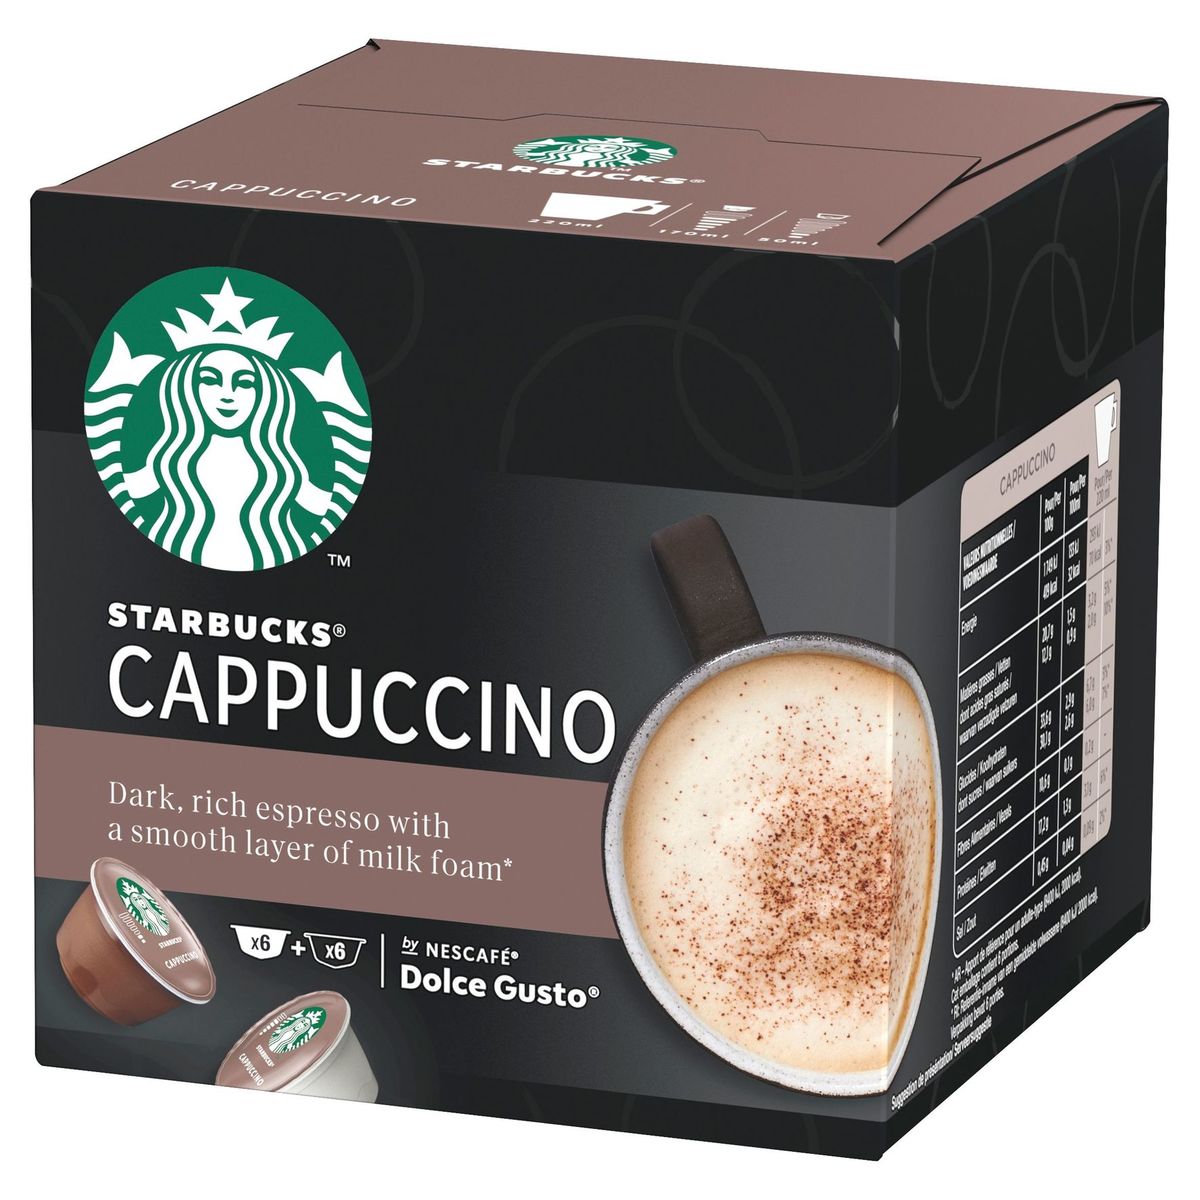 Starbucks Cappuccino by NESCAFE DOLCE GUSTO 6+6 Capsules,120 g